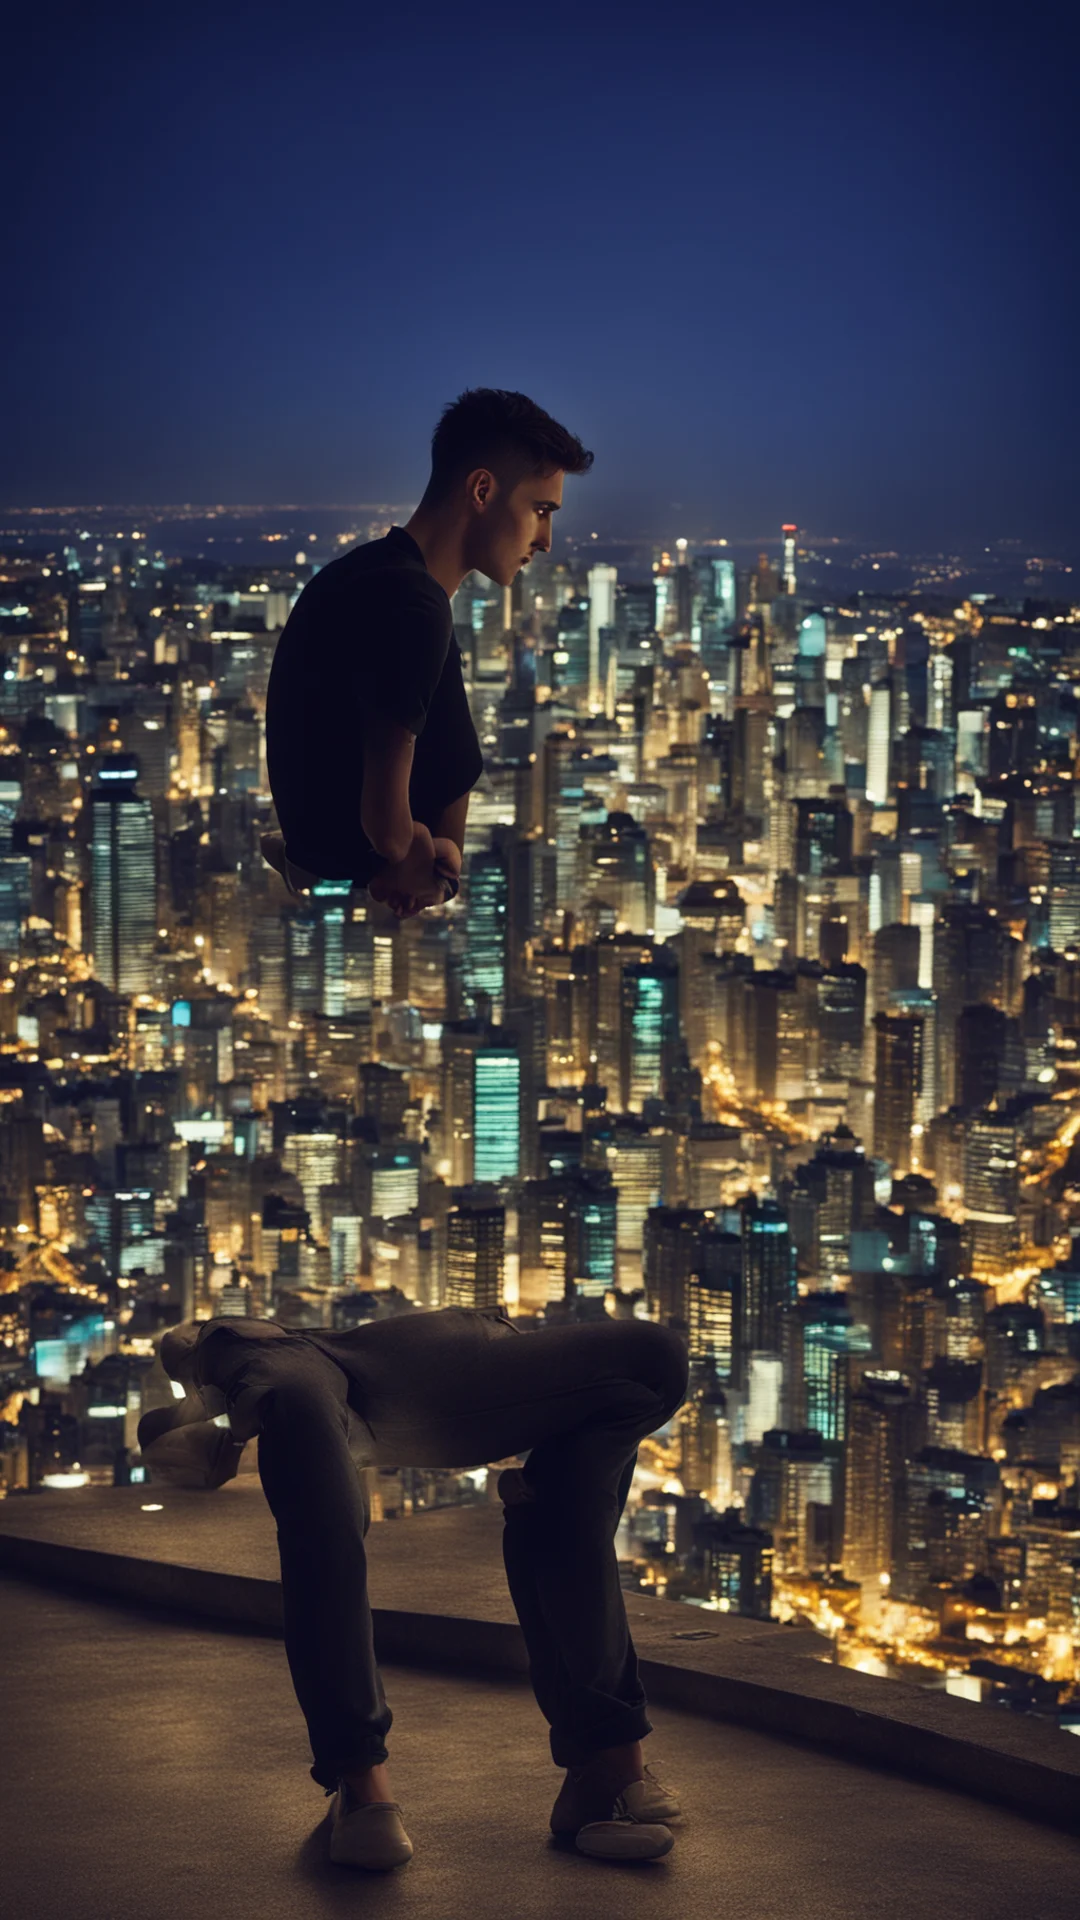 aiyoung man sitting on terace and looking on city at night amazing awesome portrait 2 tall